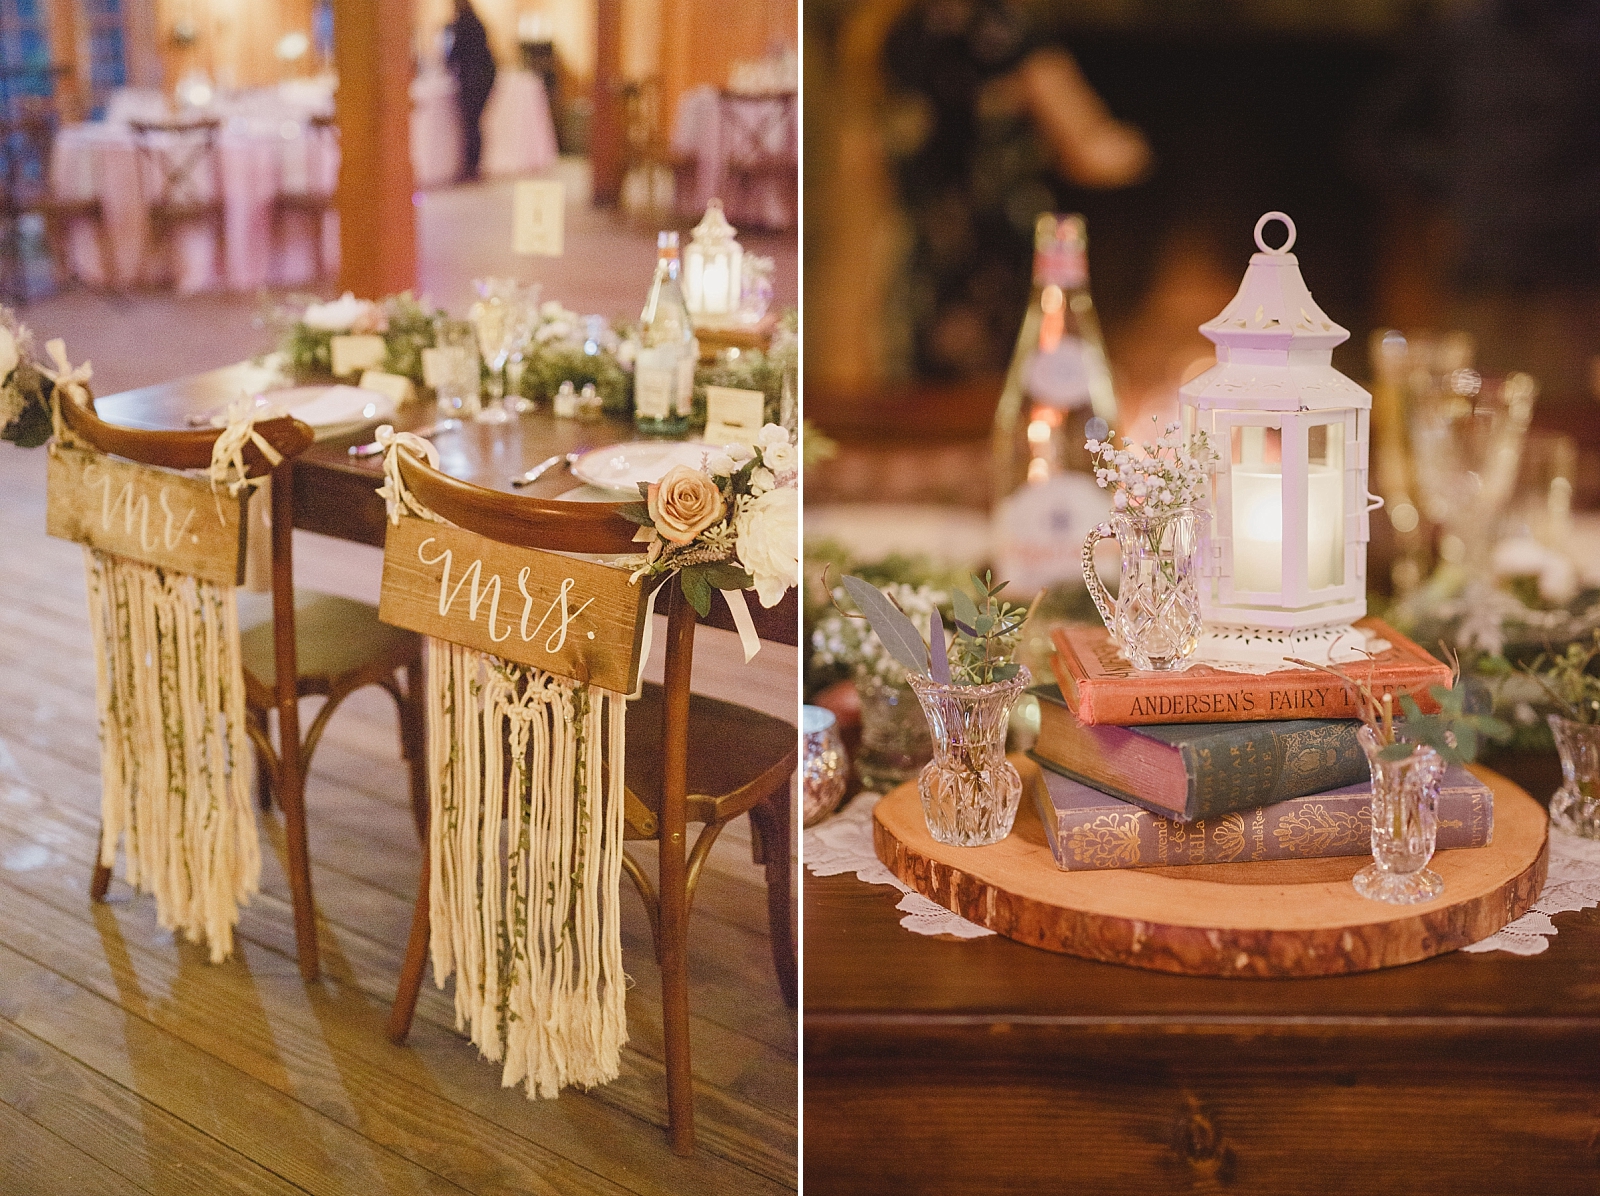 Lord of the rings wedding reception details